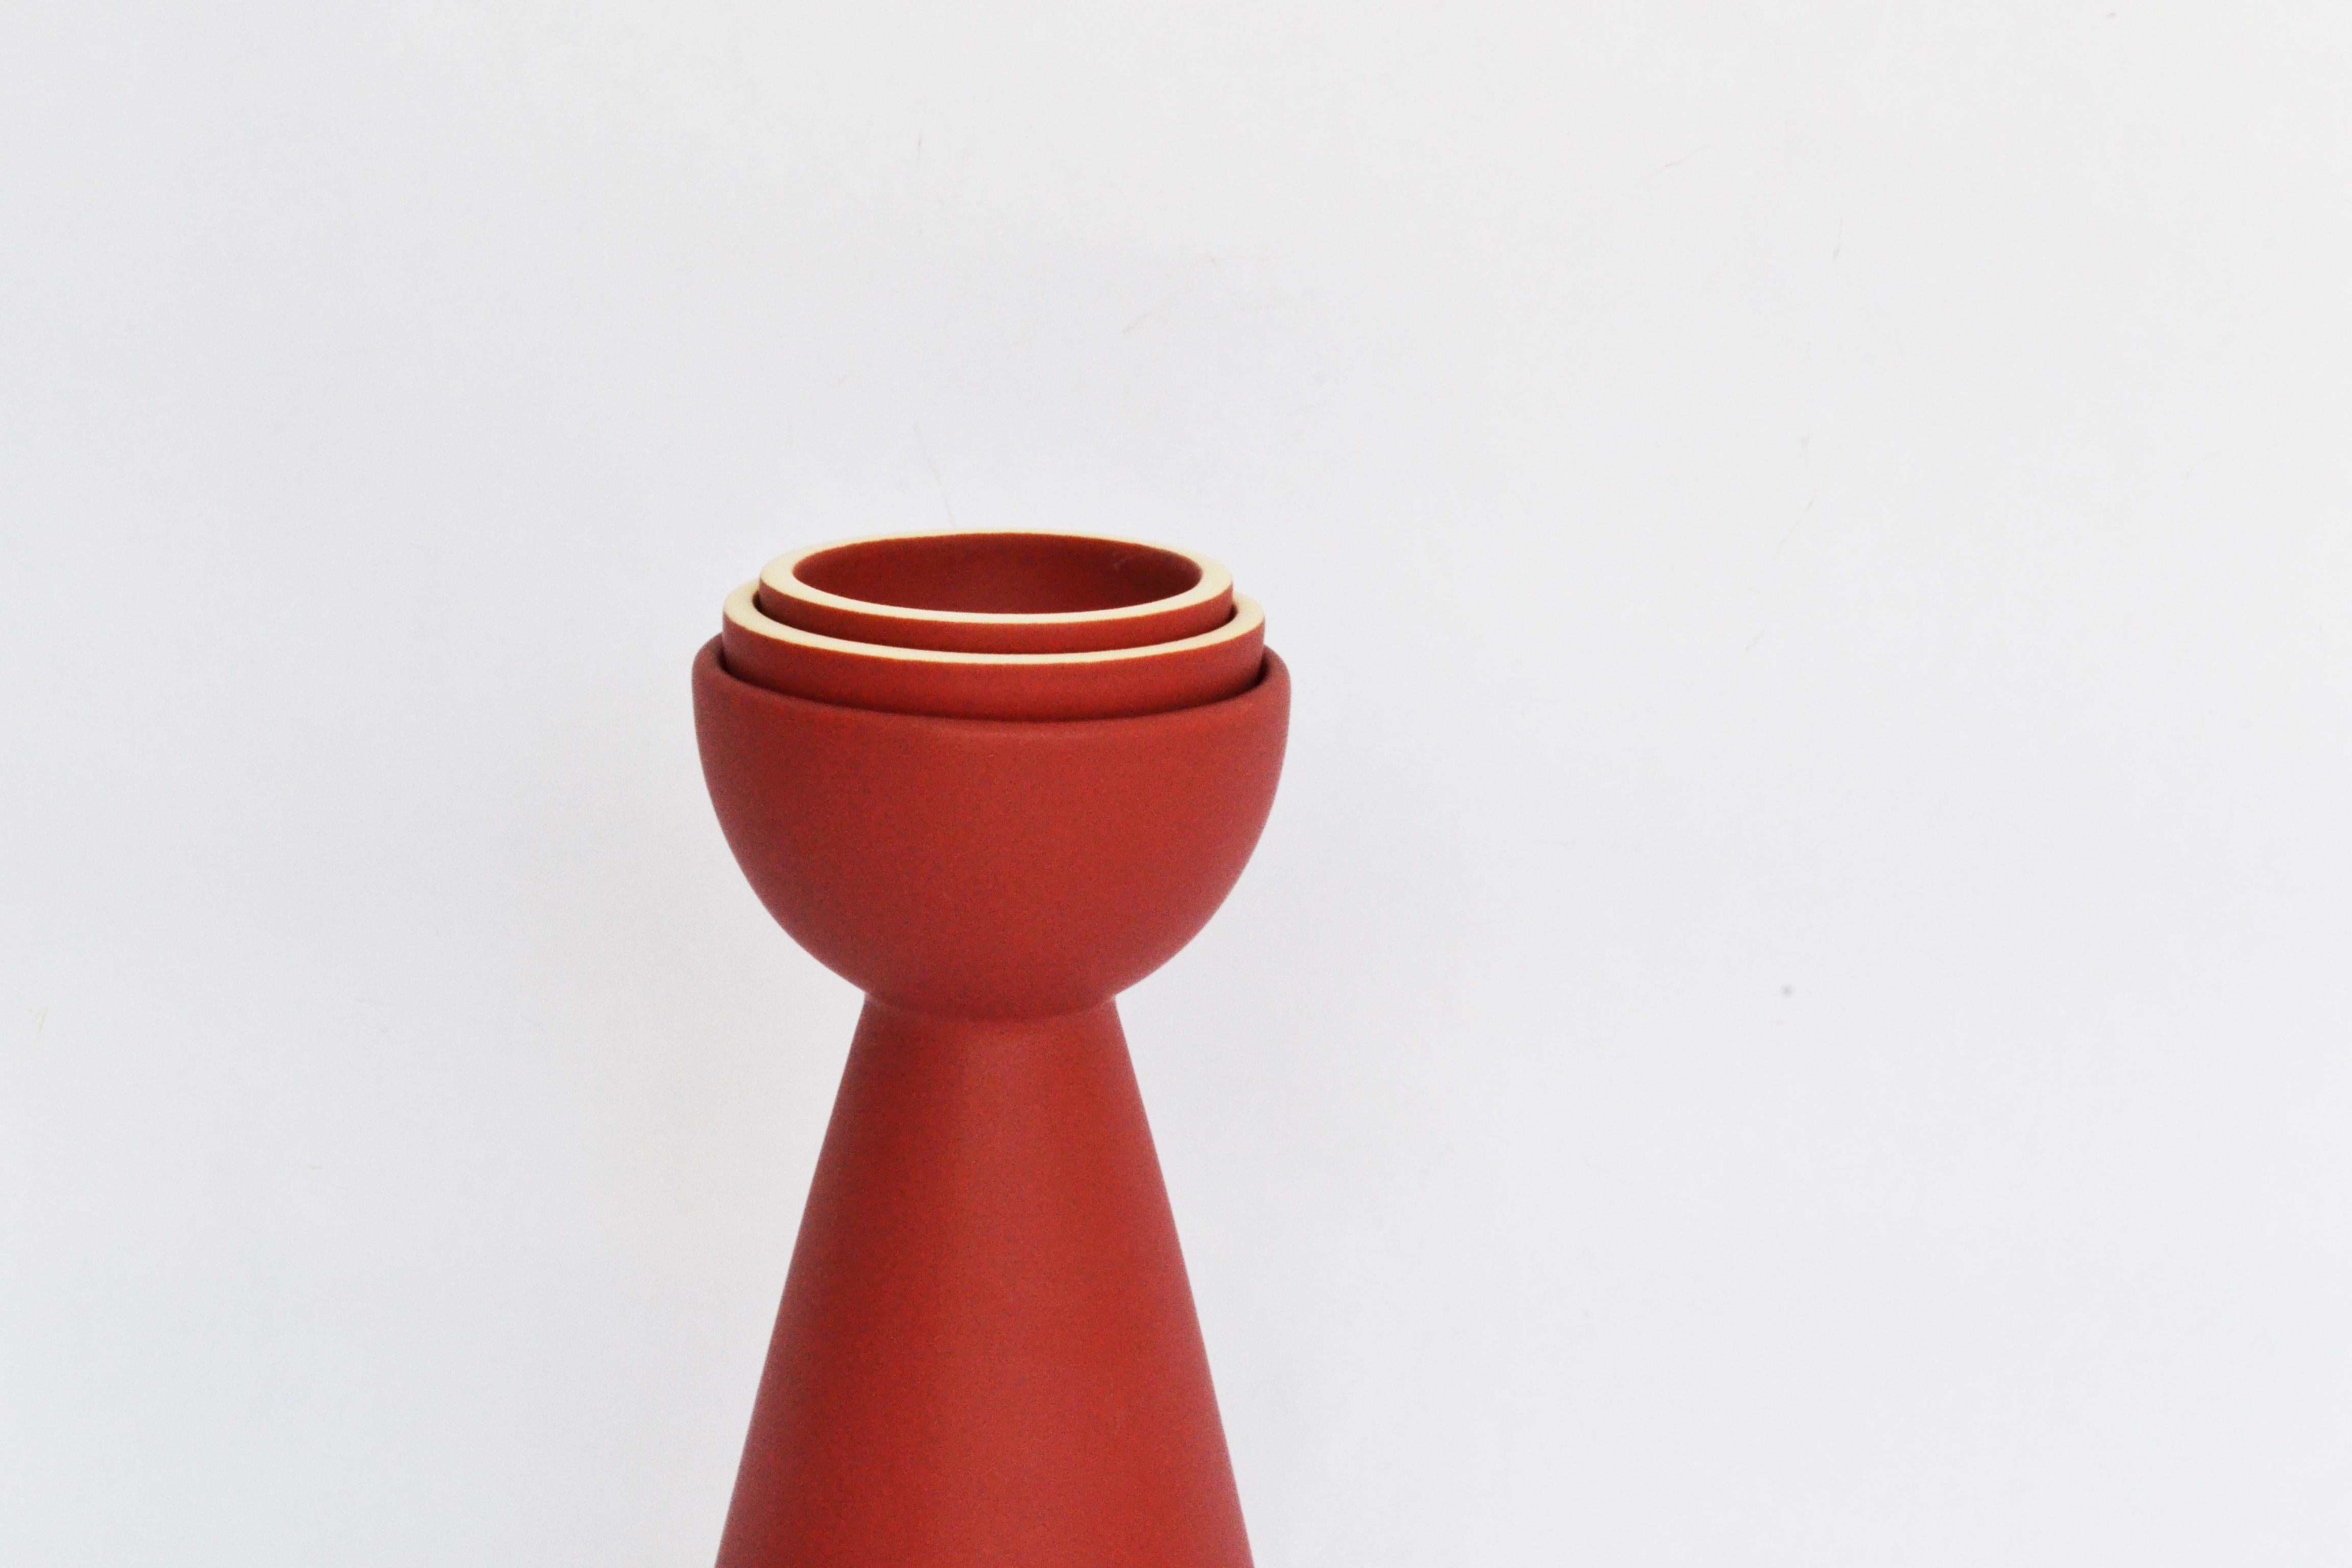 Vernissé RED Carafe Contemporary Inspired by Traditional Jug Pitcher for Mezcal en vente